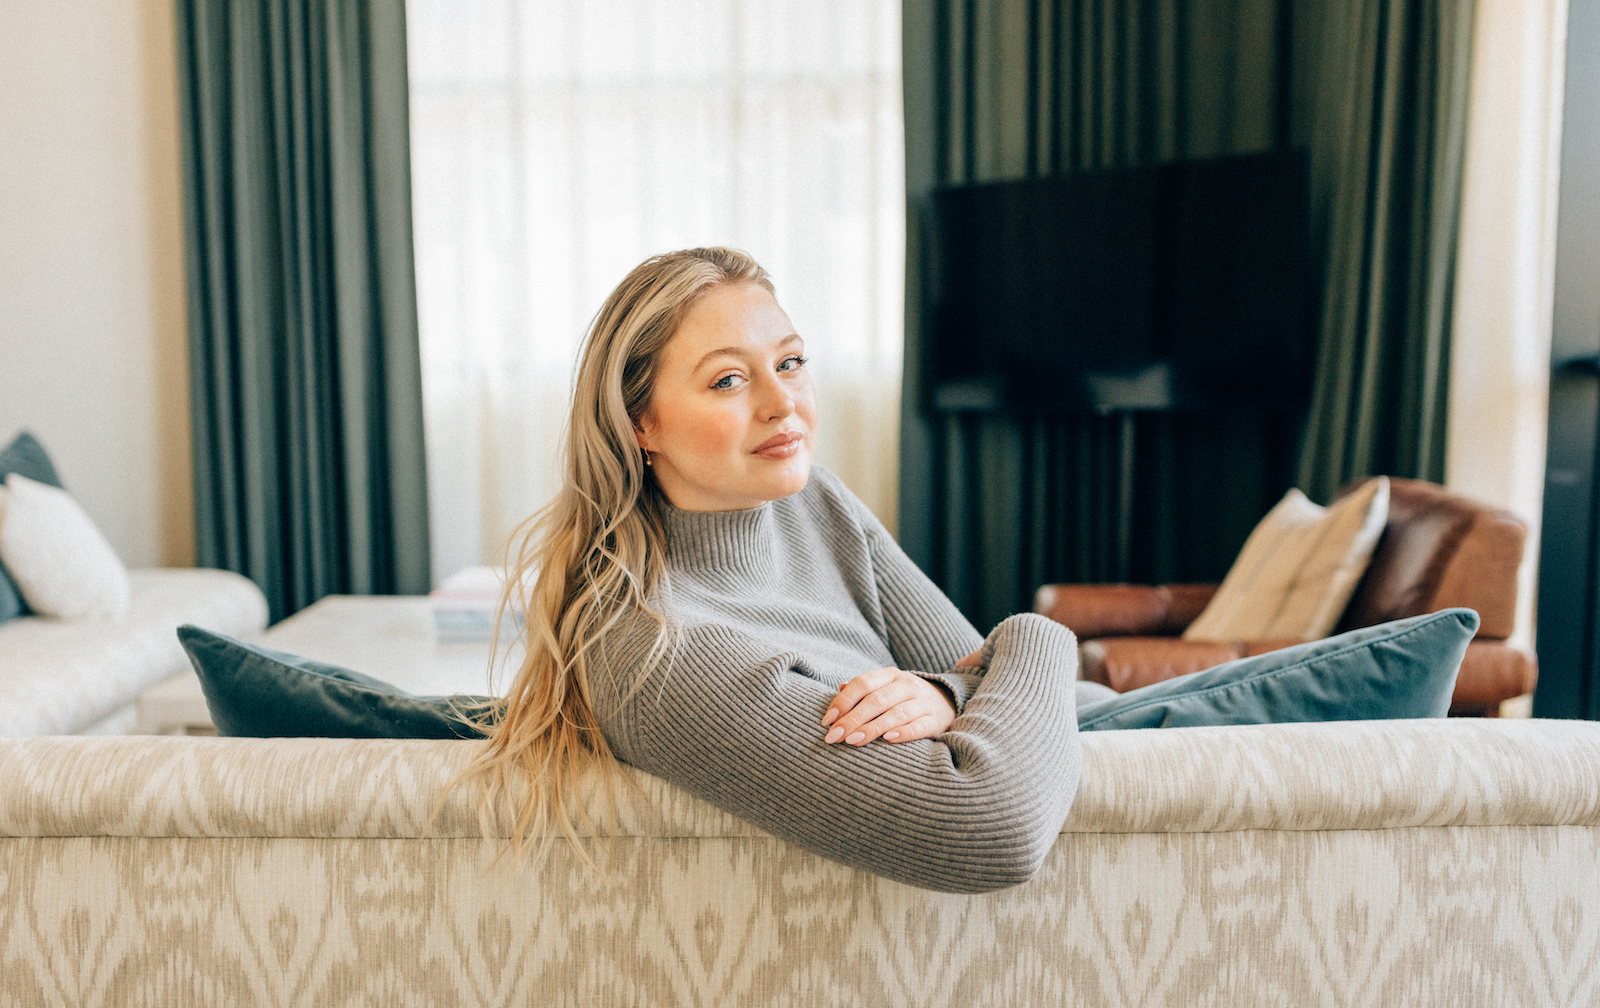 Iskra Shares the Feel-Good Morning Routine That Sets Her Up For Success